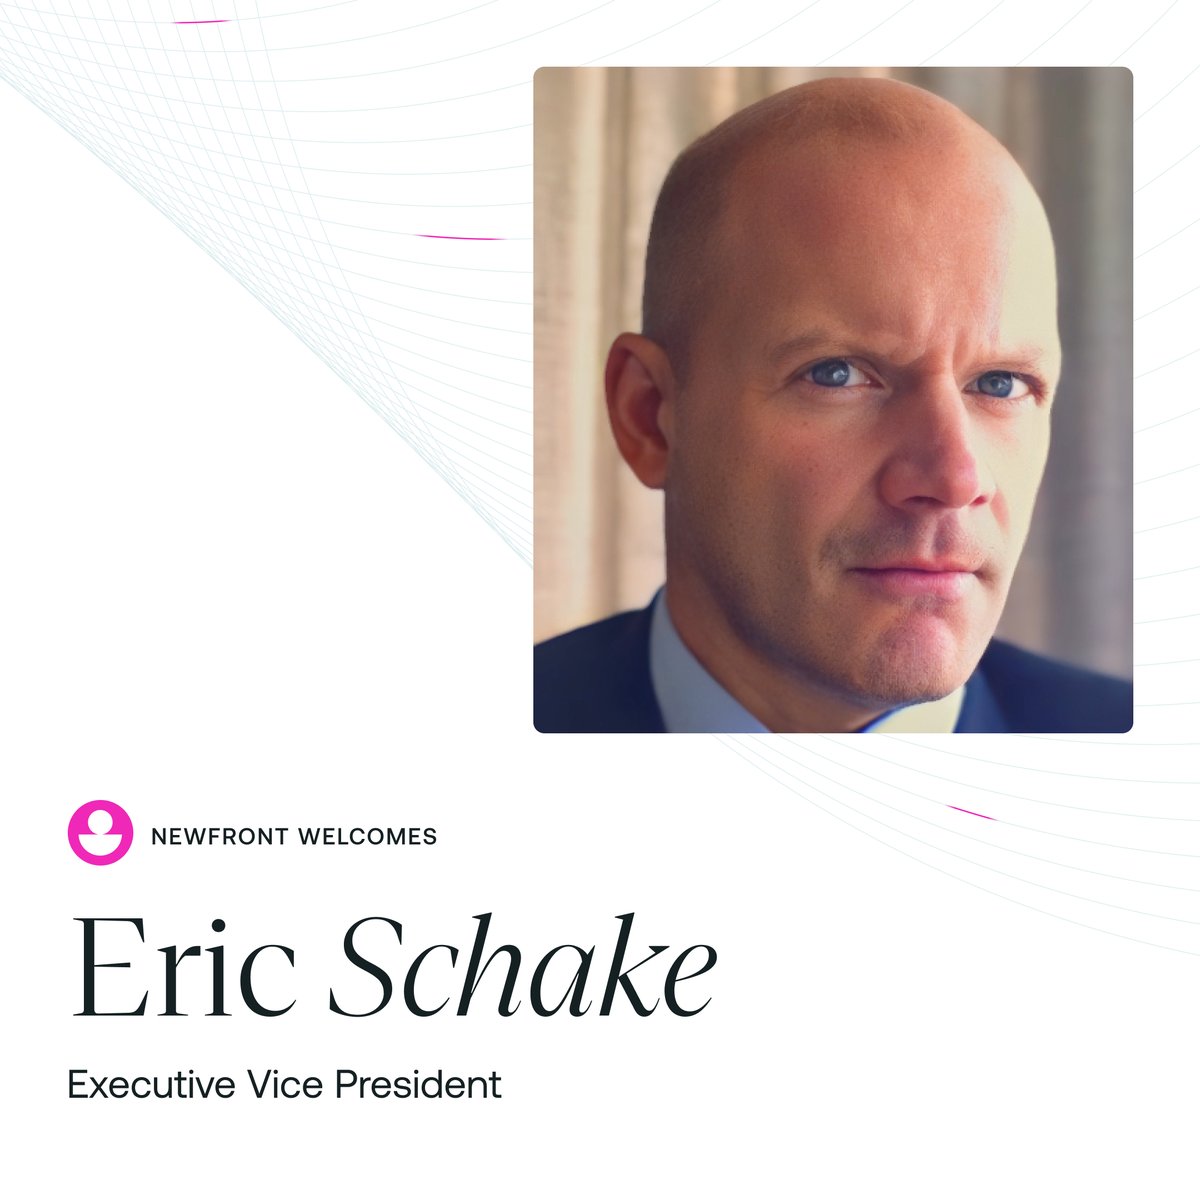 We are thrilled to announce that Dallas-based Eric Schake has joined Newfront as Executive Vice President, further enhancing our expertise in the Lone Star State. Eric brings more than 35 years of experience in serving real estate, hospitality, and development companies. Welcome!